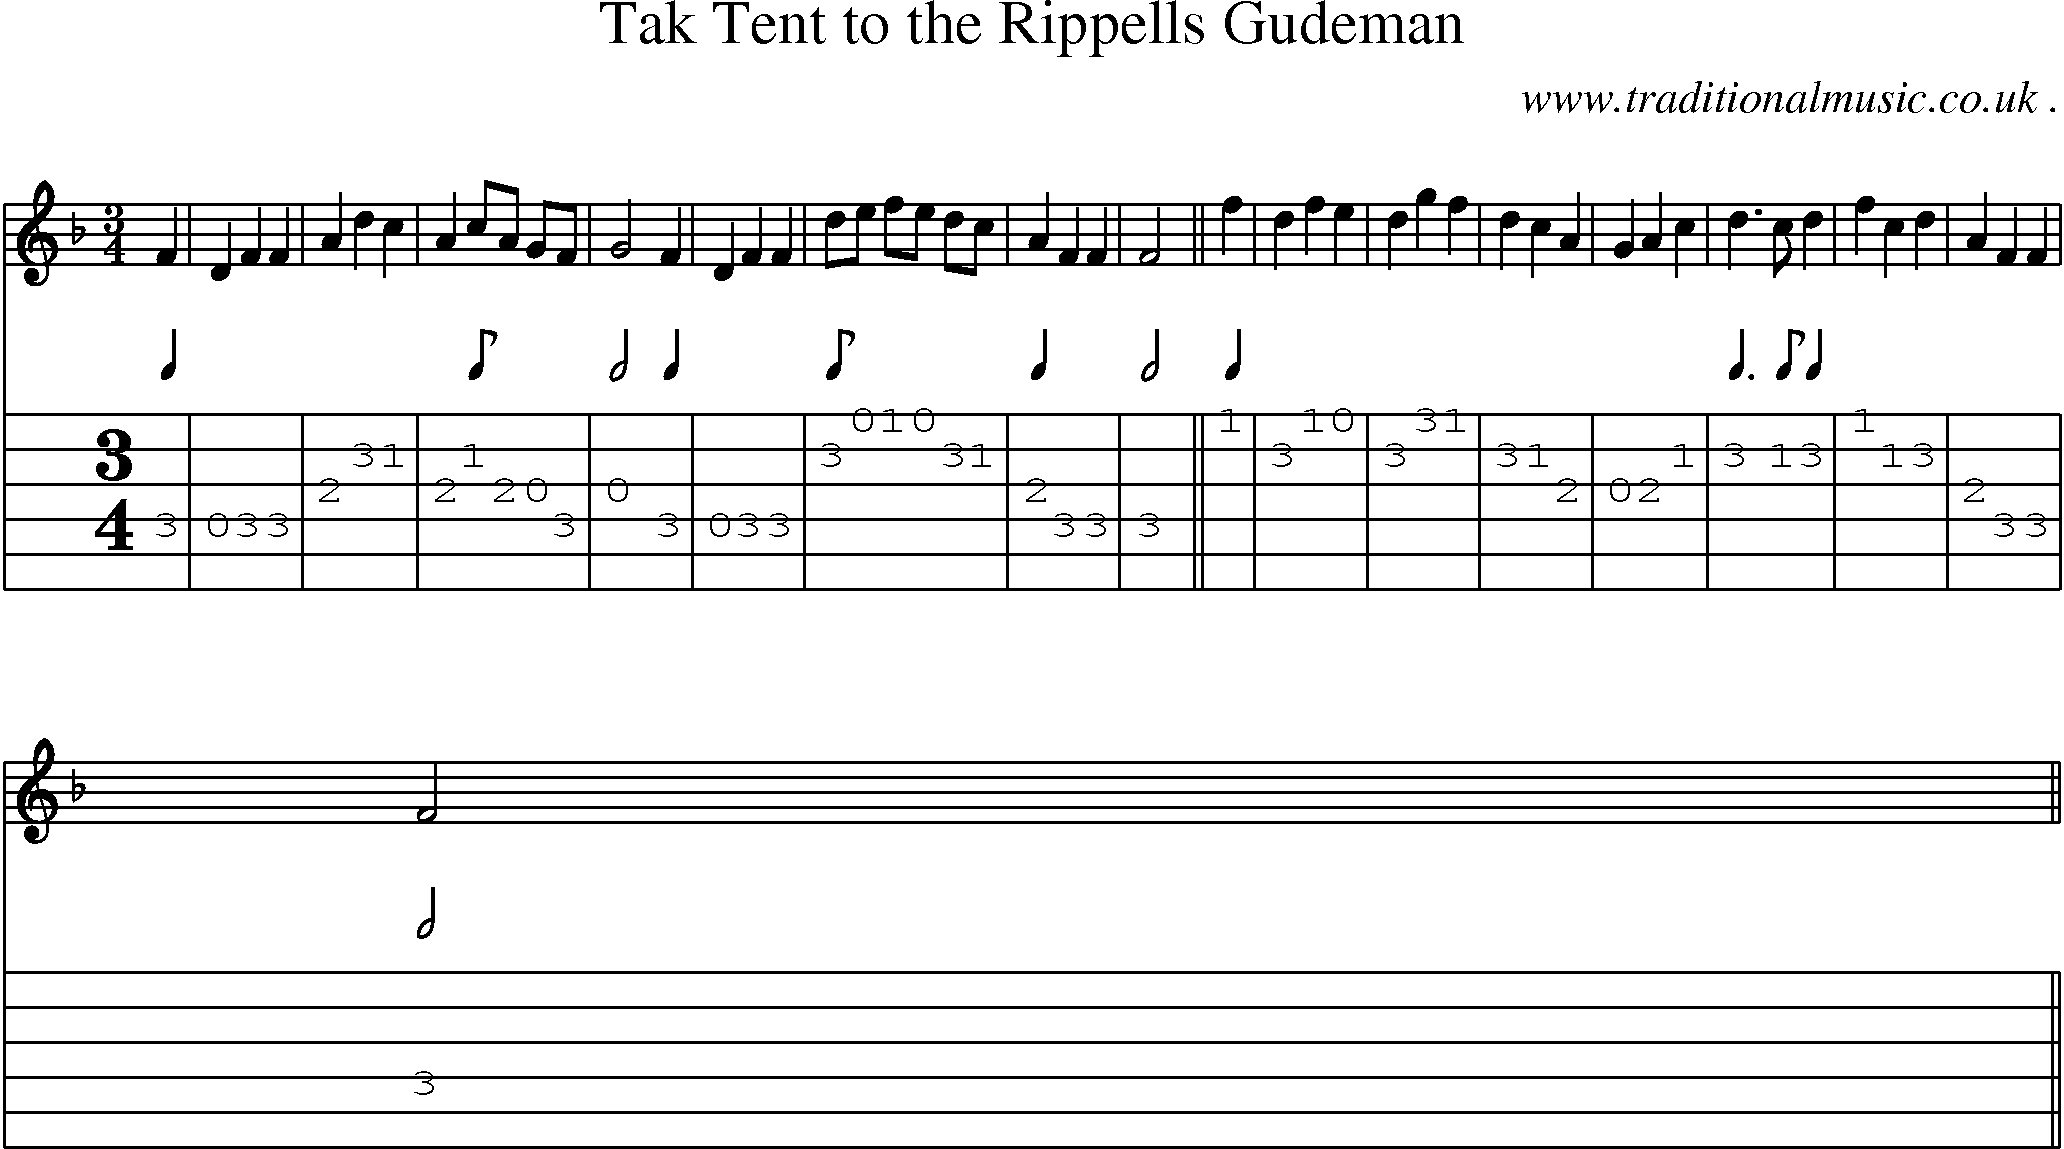 Sheet-Music and Guitar Tabs for Tak Tent To The Rippells Gudeman